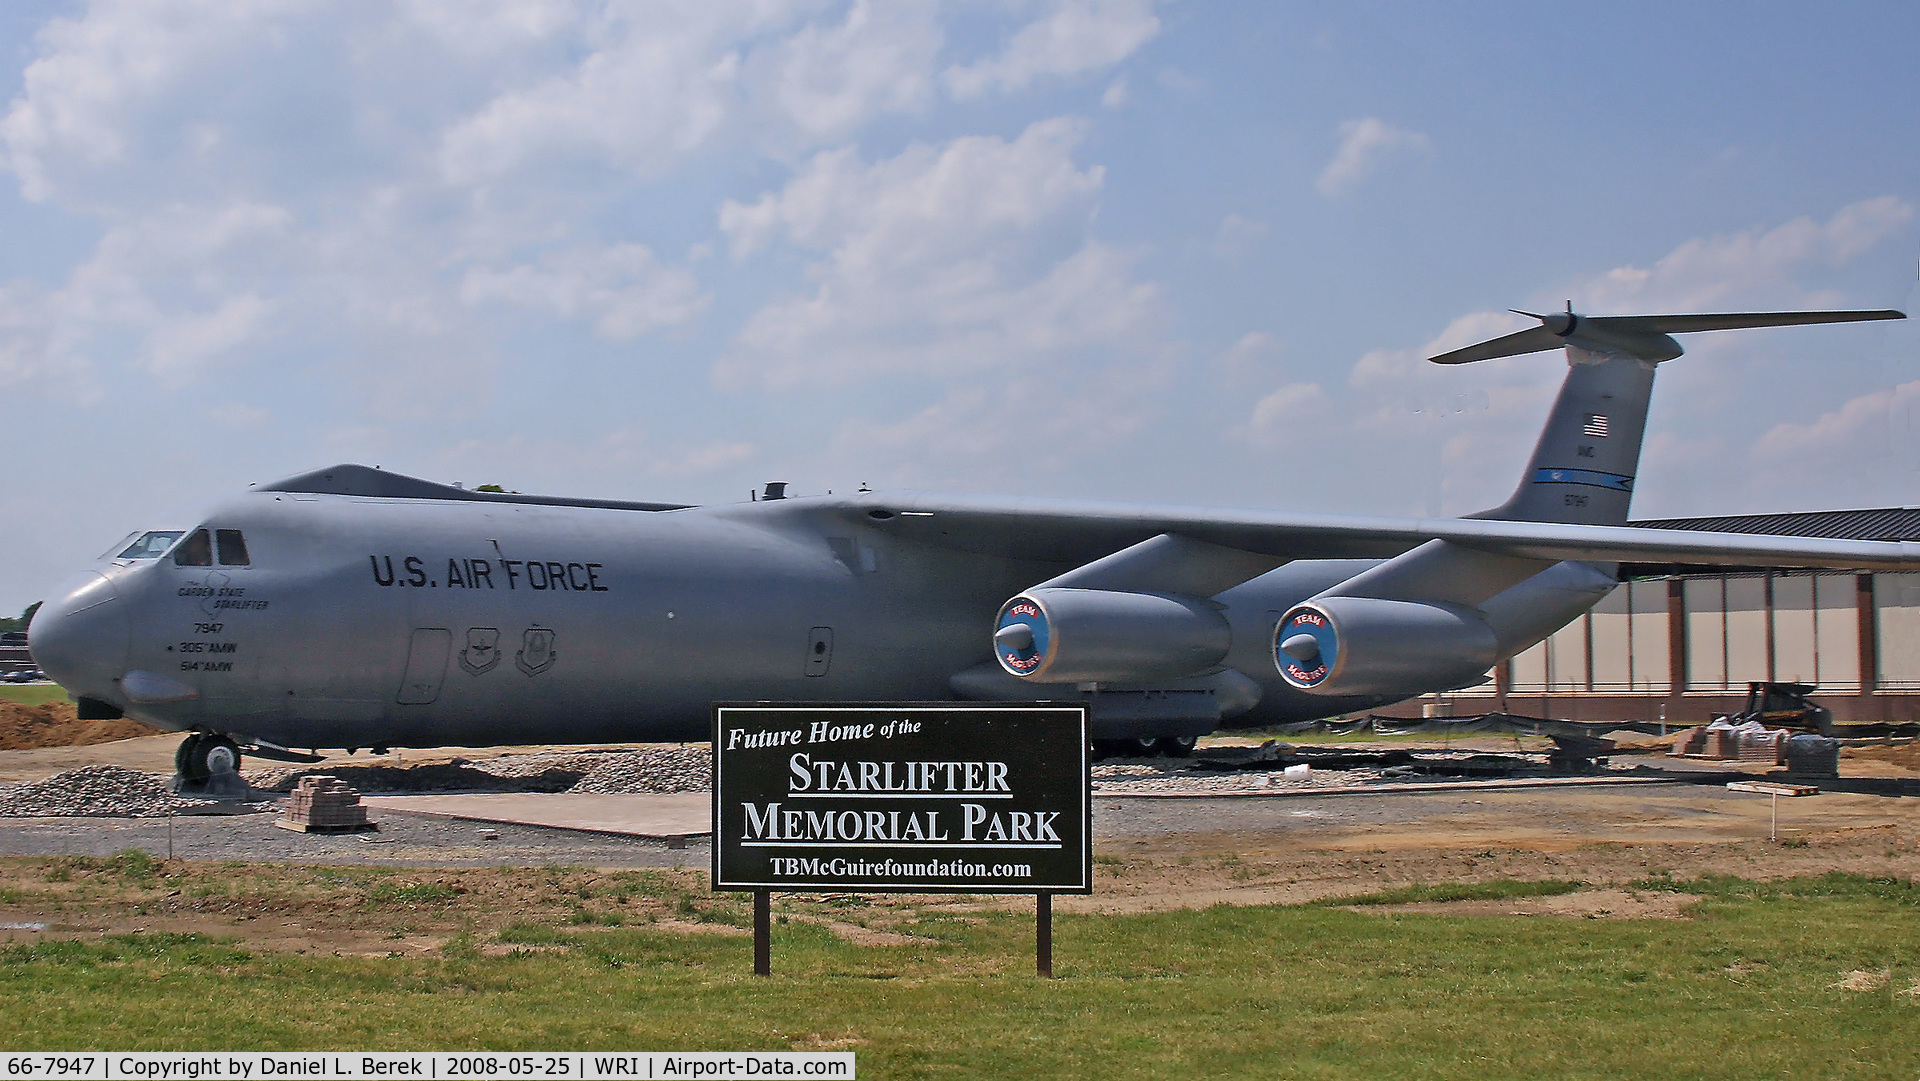 66-7947, 1966 Lockheed C-141B Starlifter C/N 300-6239, This nice Starlifter is preserved at McGuire Air Force Base.